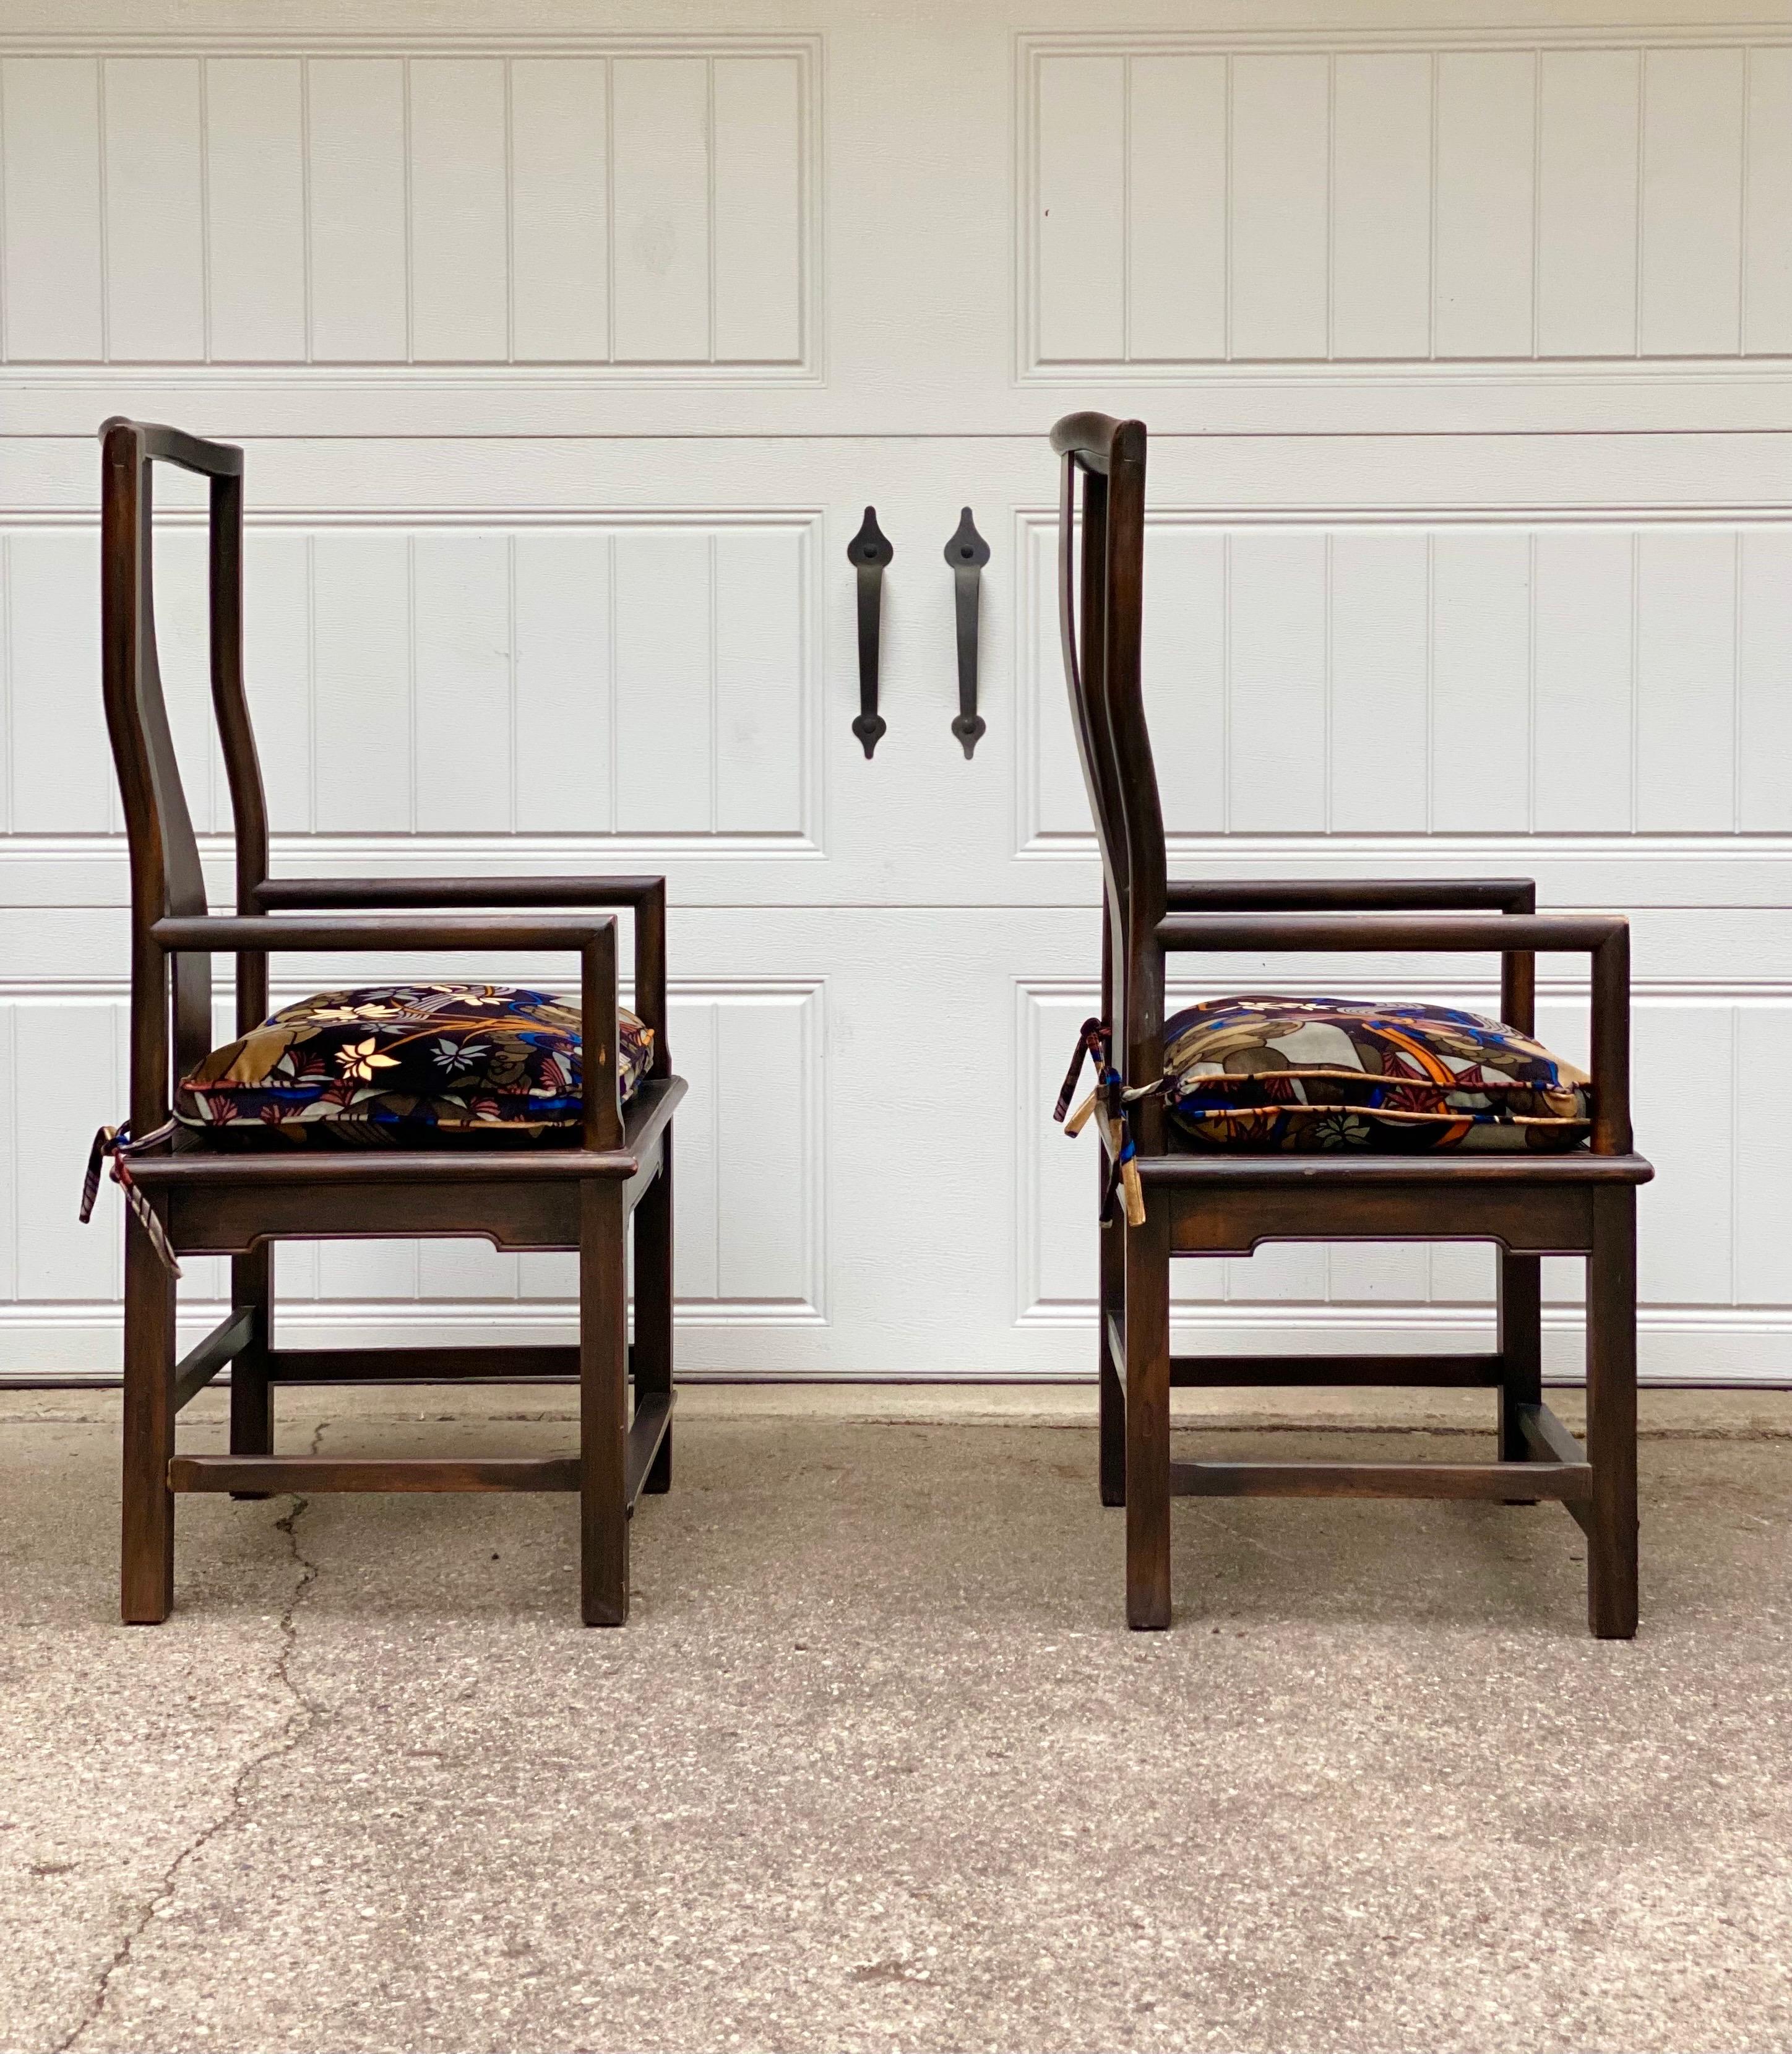 We are very pleased to offer a set of vintage chairs from the 1960s. This pair has a graceful and elegant appearance, reflecting the artistic sensibilities often found in Asian furniture. One distinctive feature is their splat back design, a solid